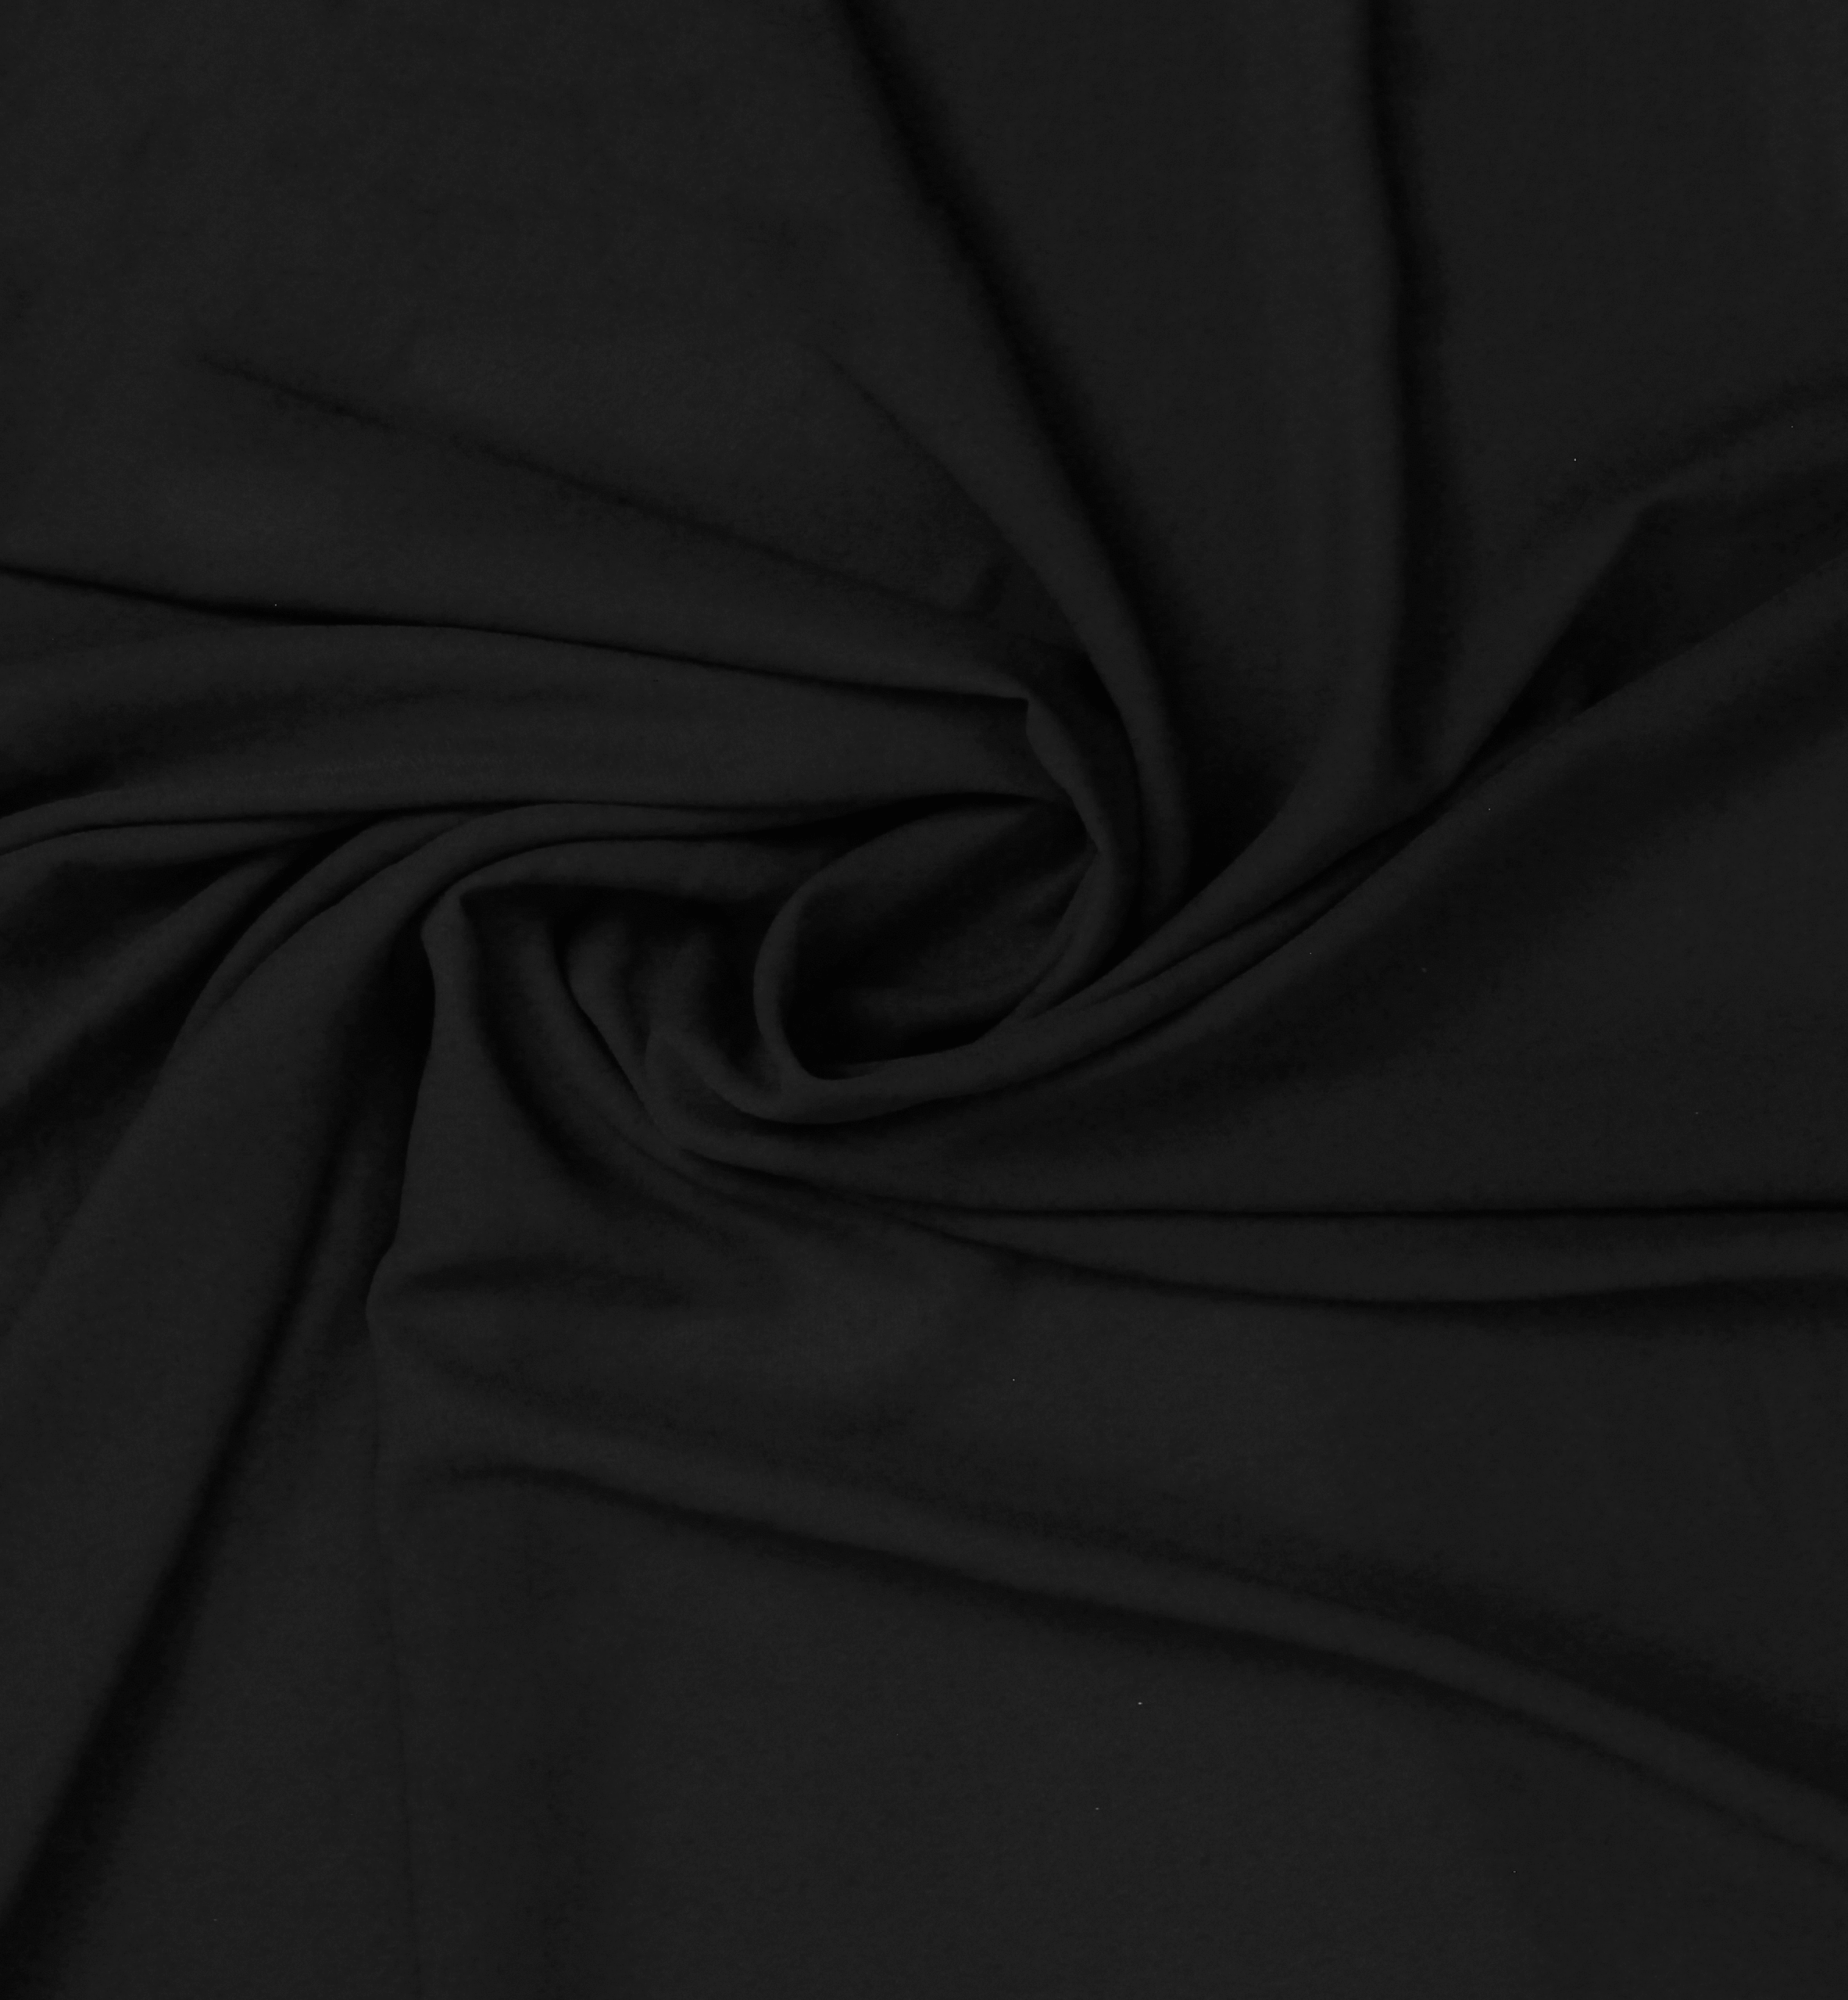 A solid black georgette fabric twisted into spiral.